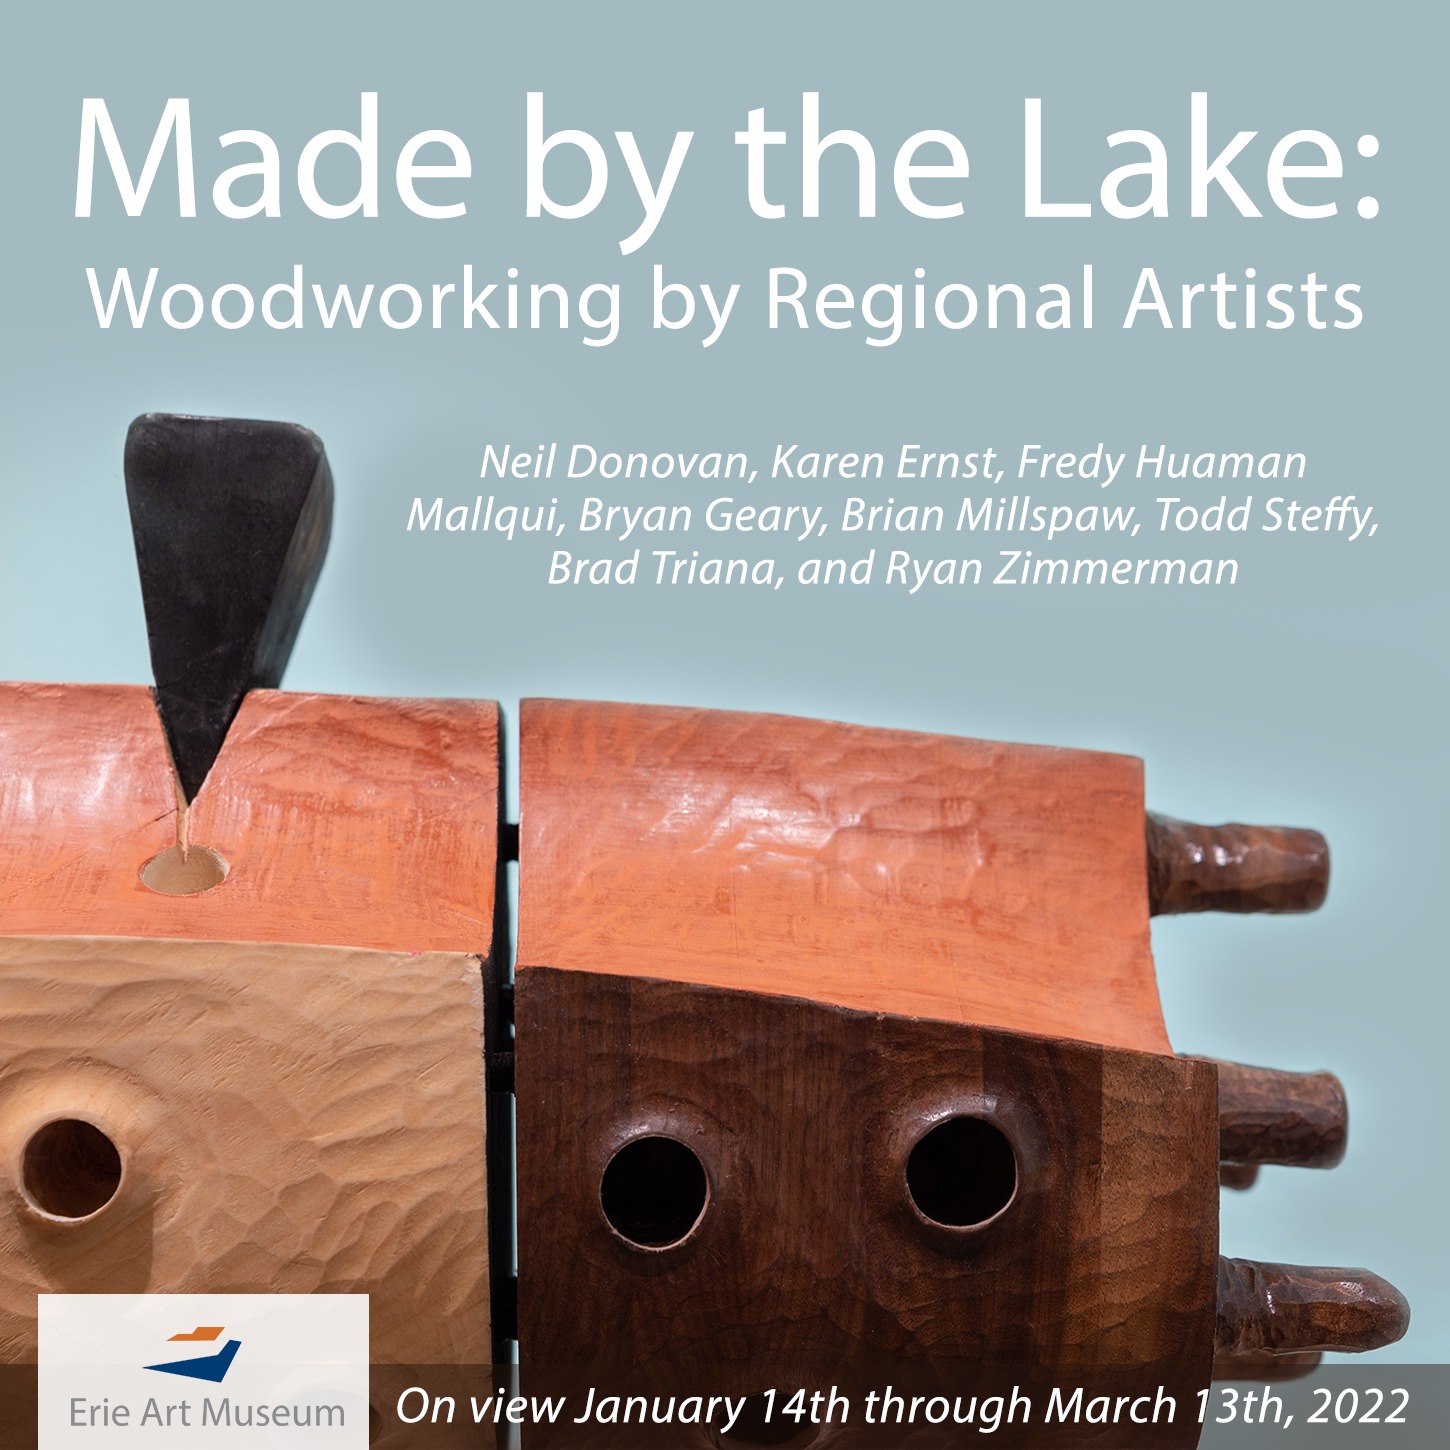 Made by the Lake: Woodworking by Regional Artists